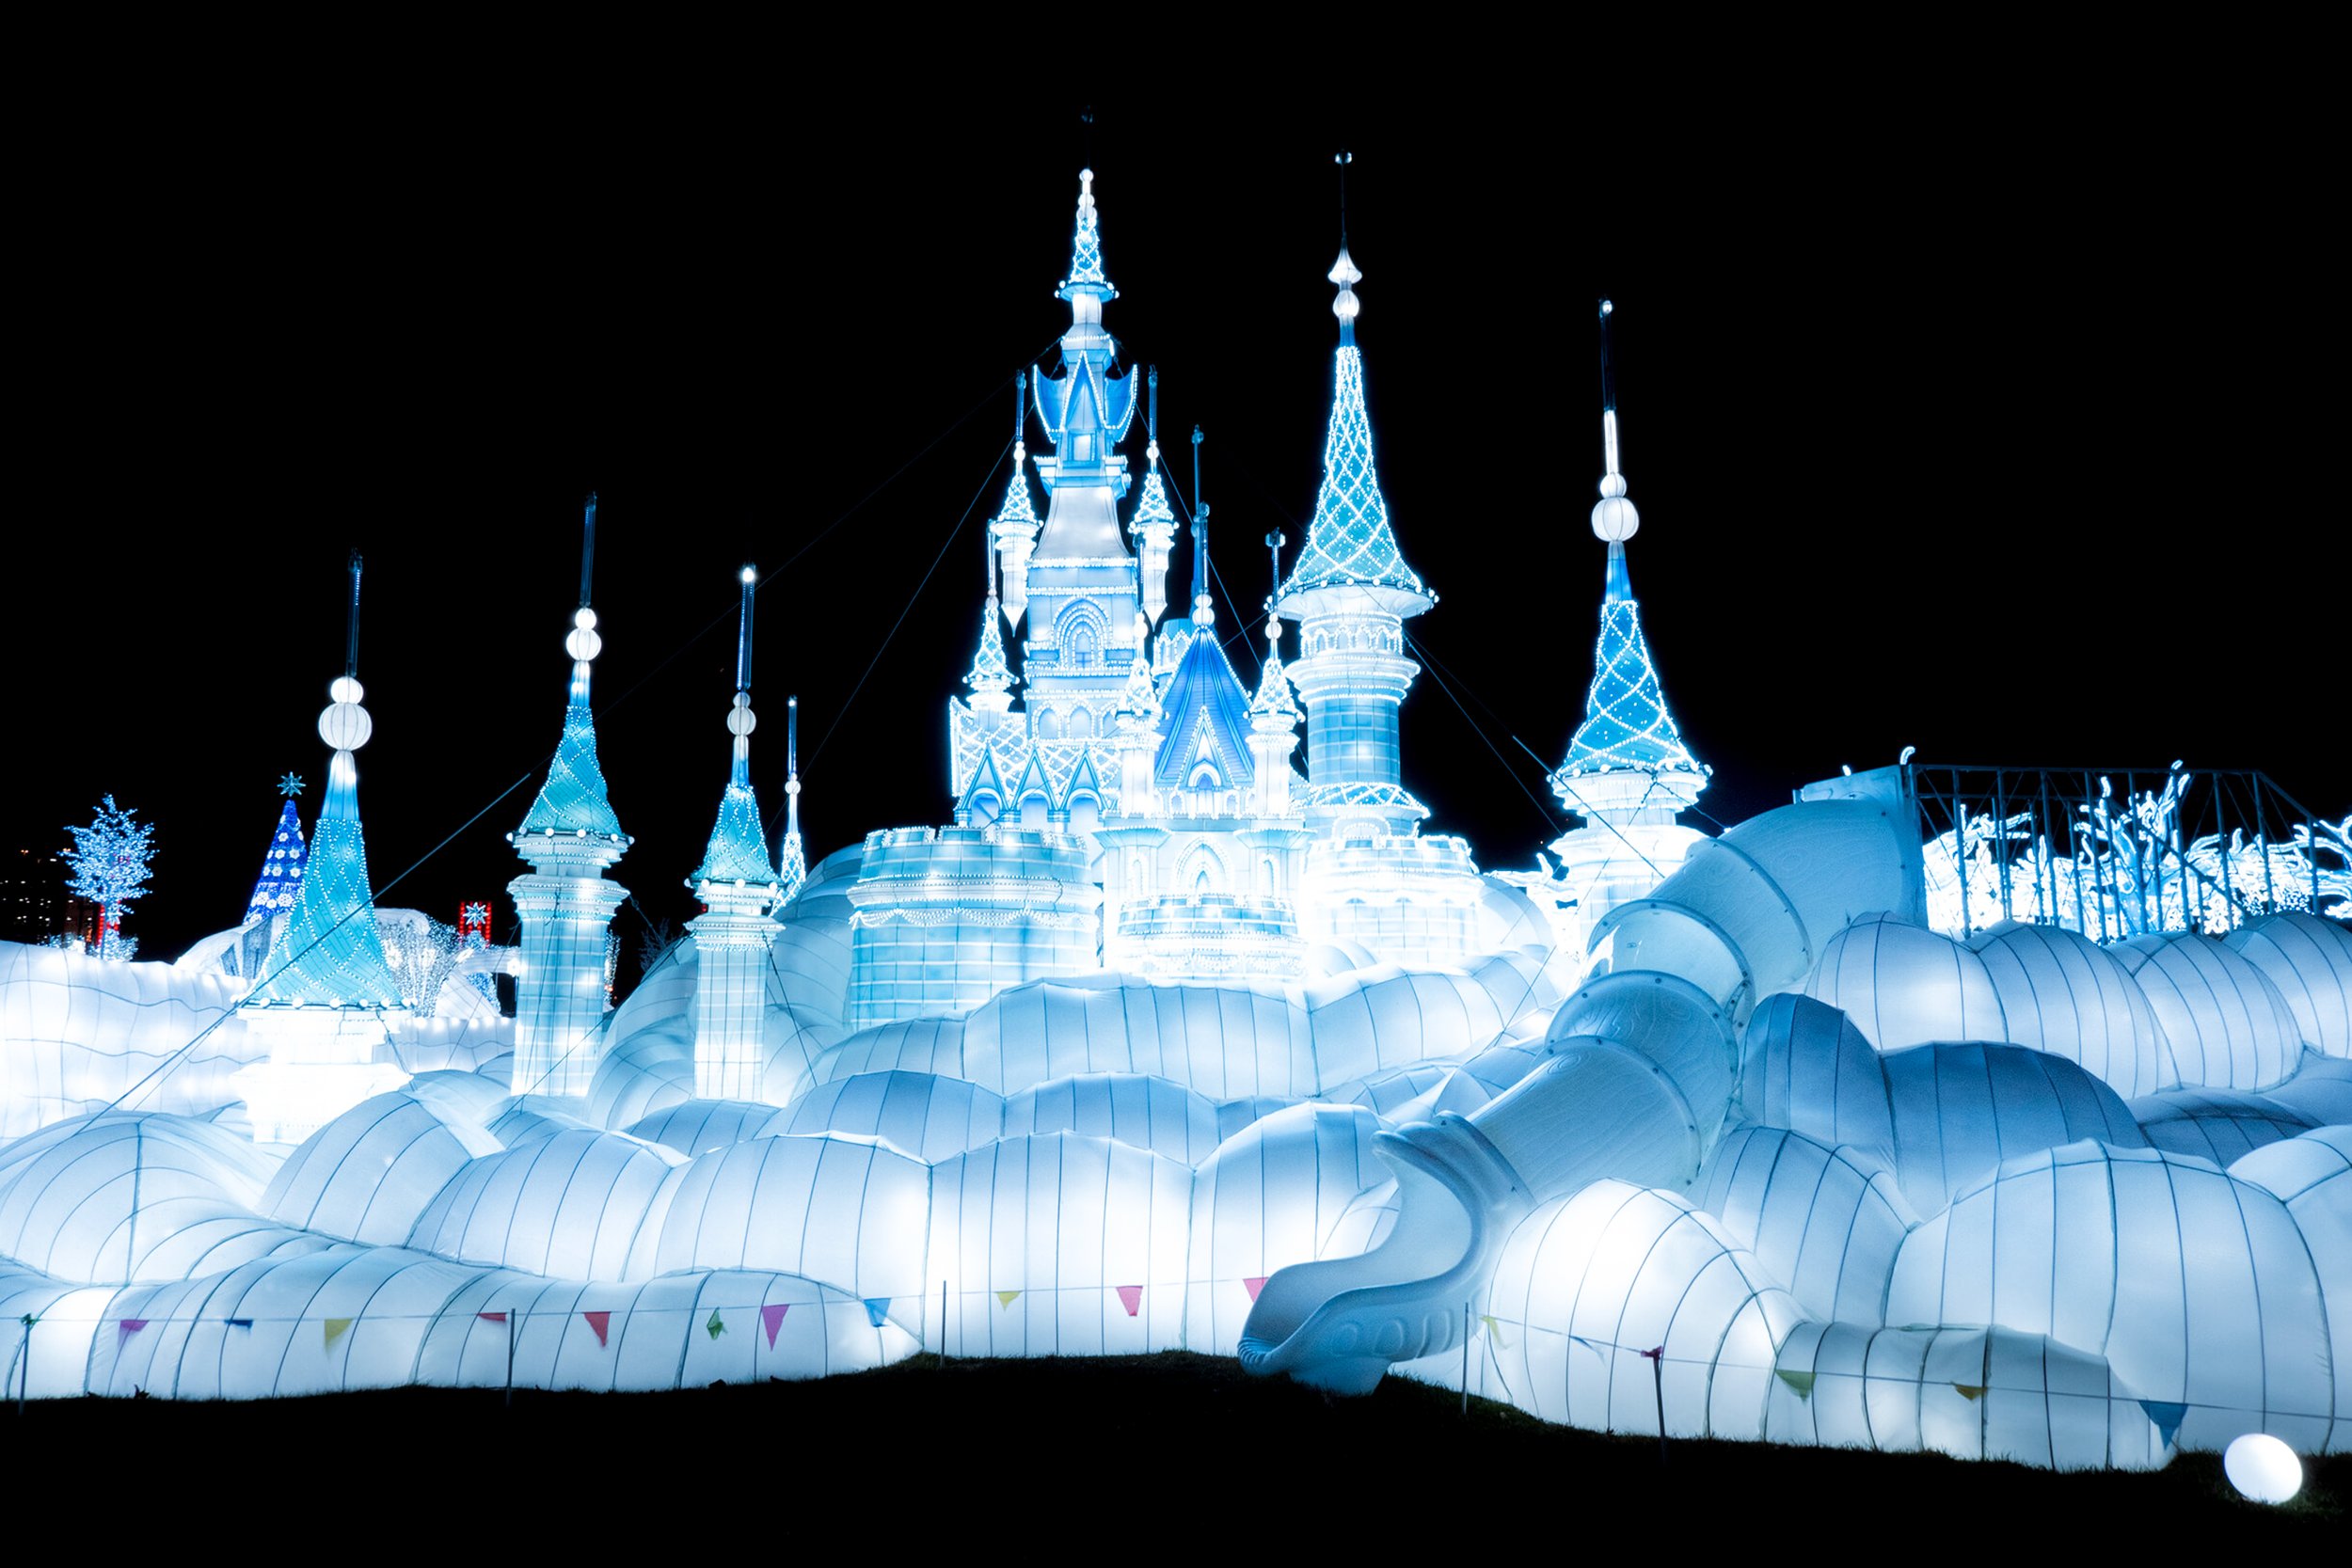 the-castle-in-the-clouds-the-winter-fantasy-light-arts-luminocity-festival.jpg